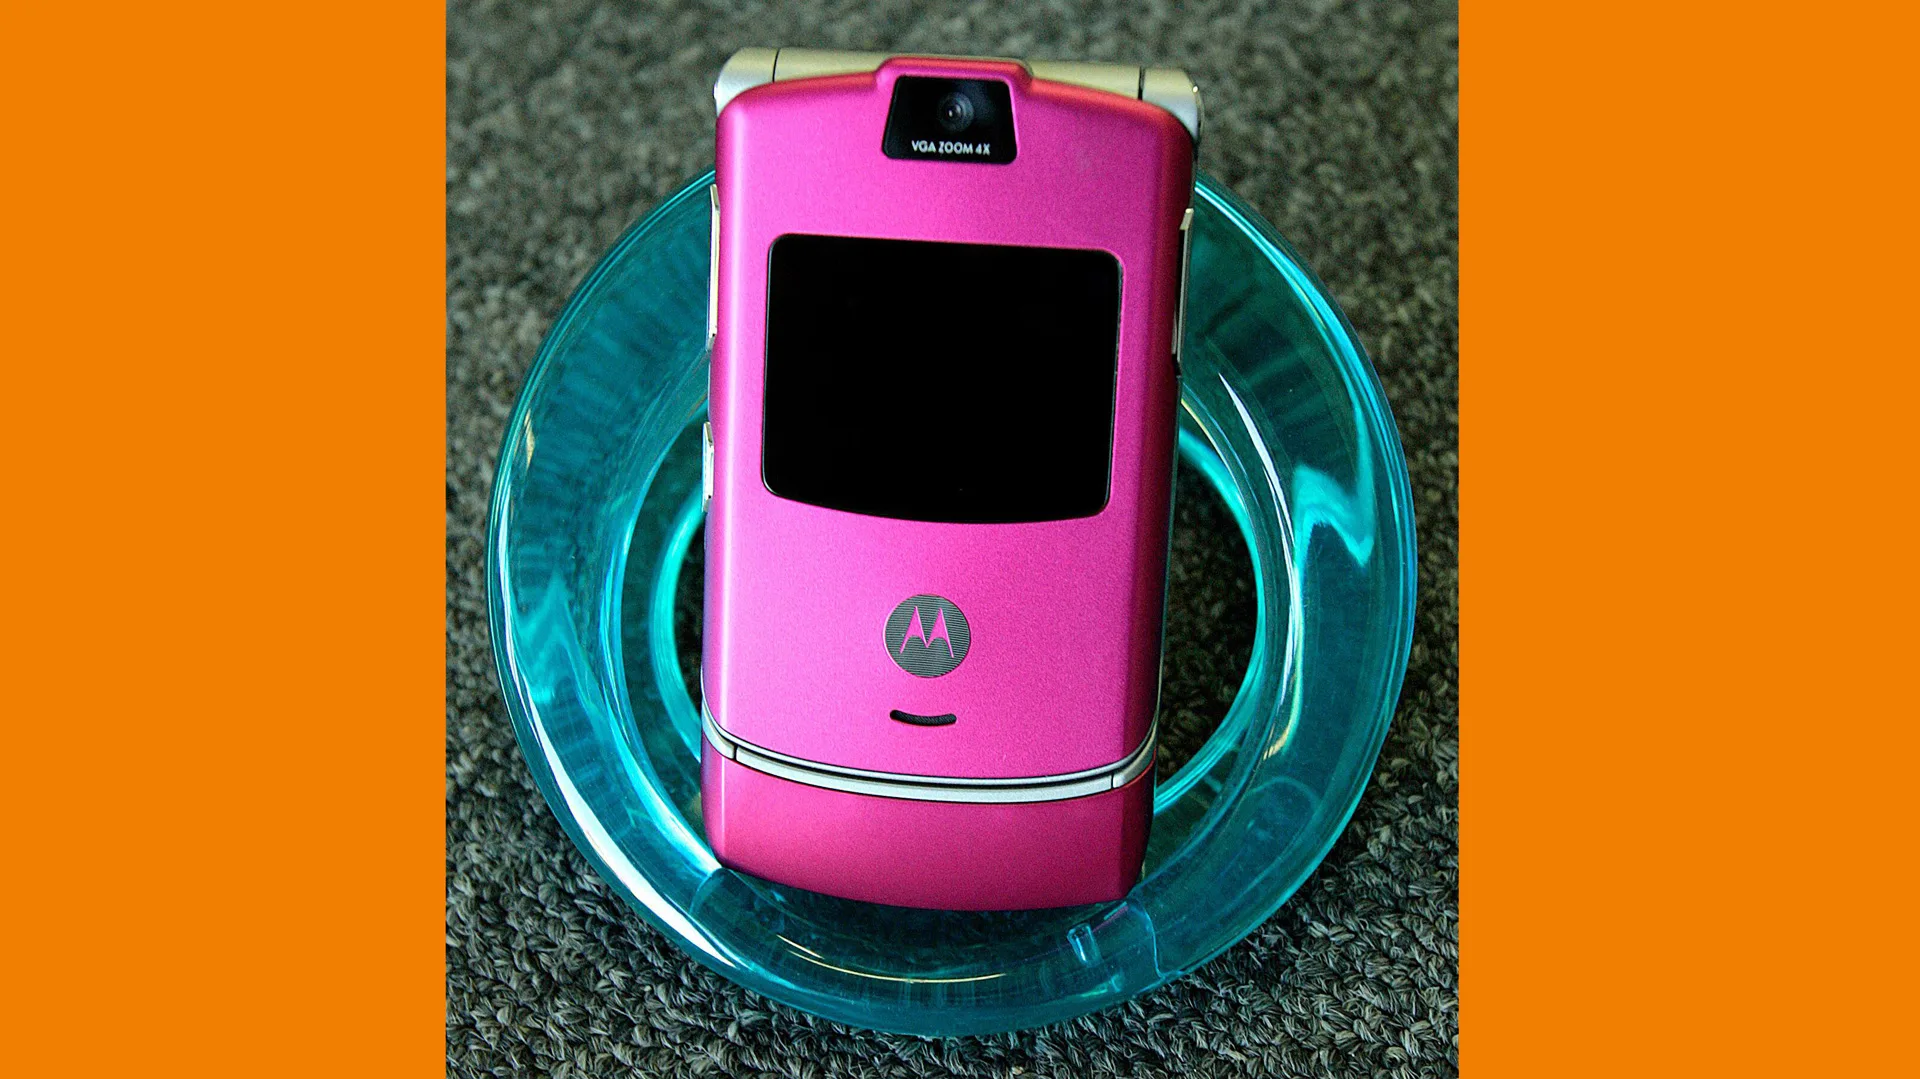 A photograph of a Motorola Razr phone in pink sat in a blue glass bowl with orange borders